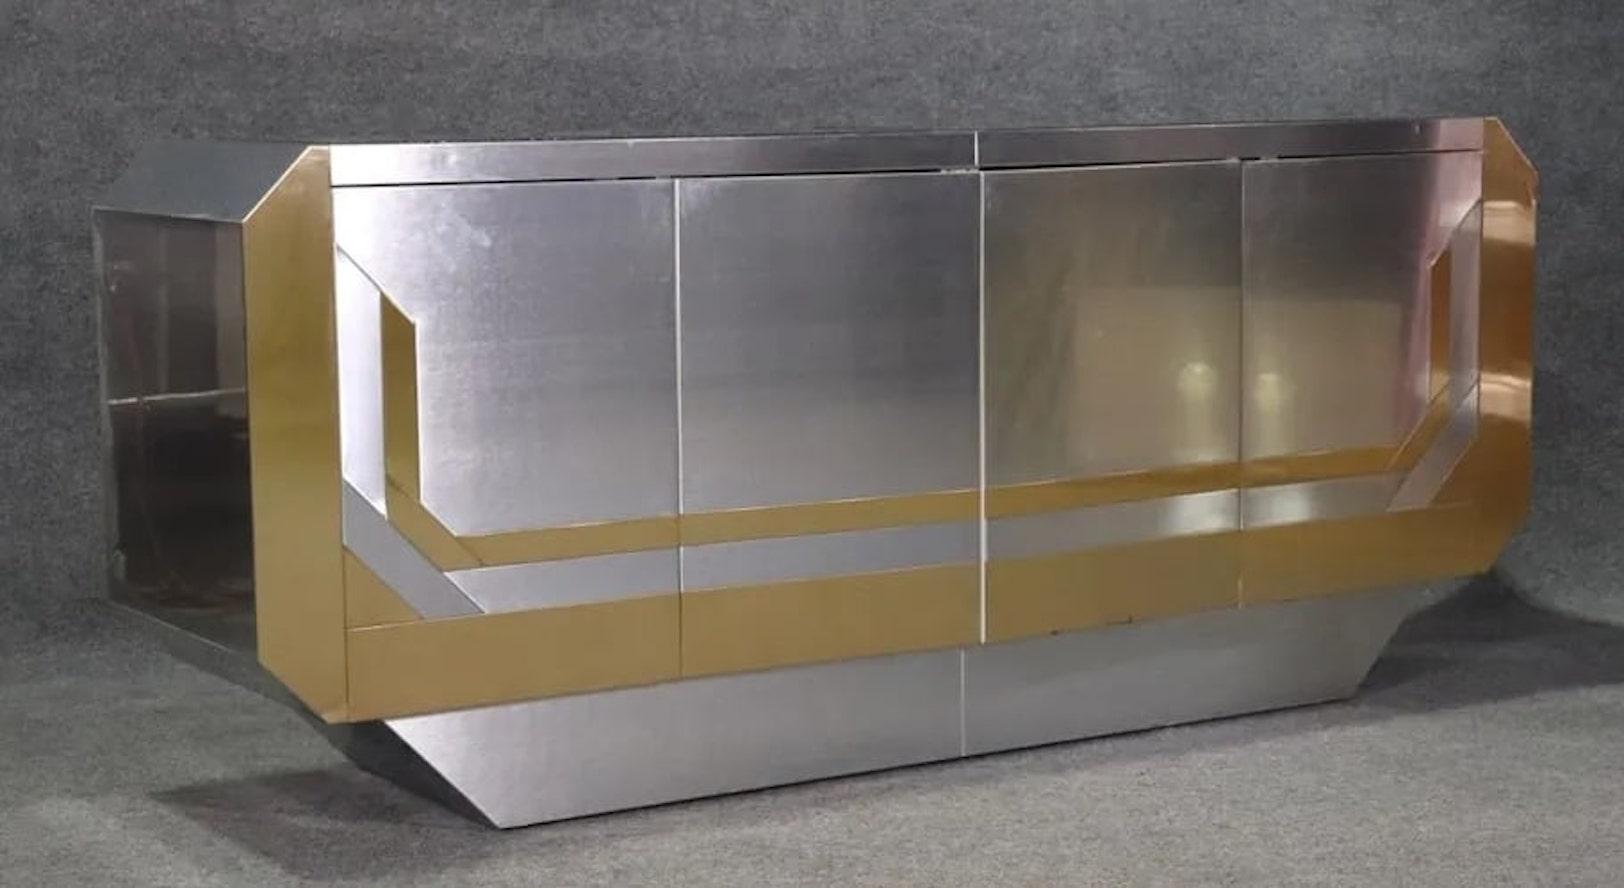 Vintage deco style credenza with chrome and brass plating. Three cabinets with adjustable shelves. Two mirrored panels on top.
Please confirm location NY or NJ